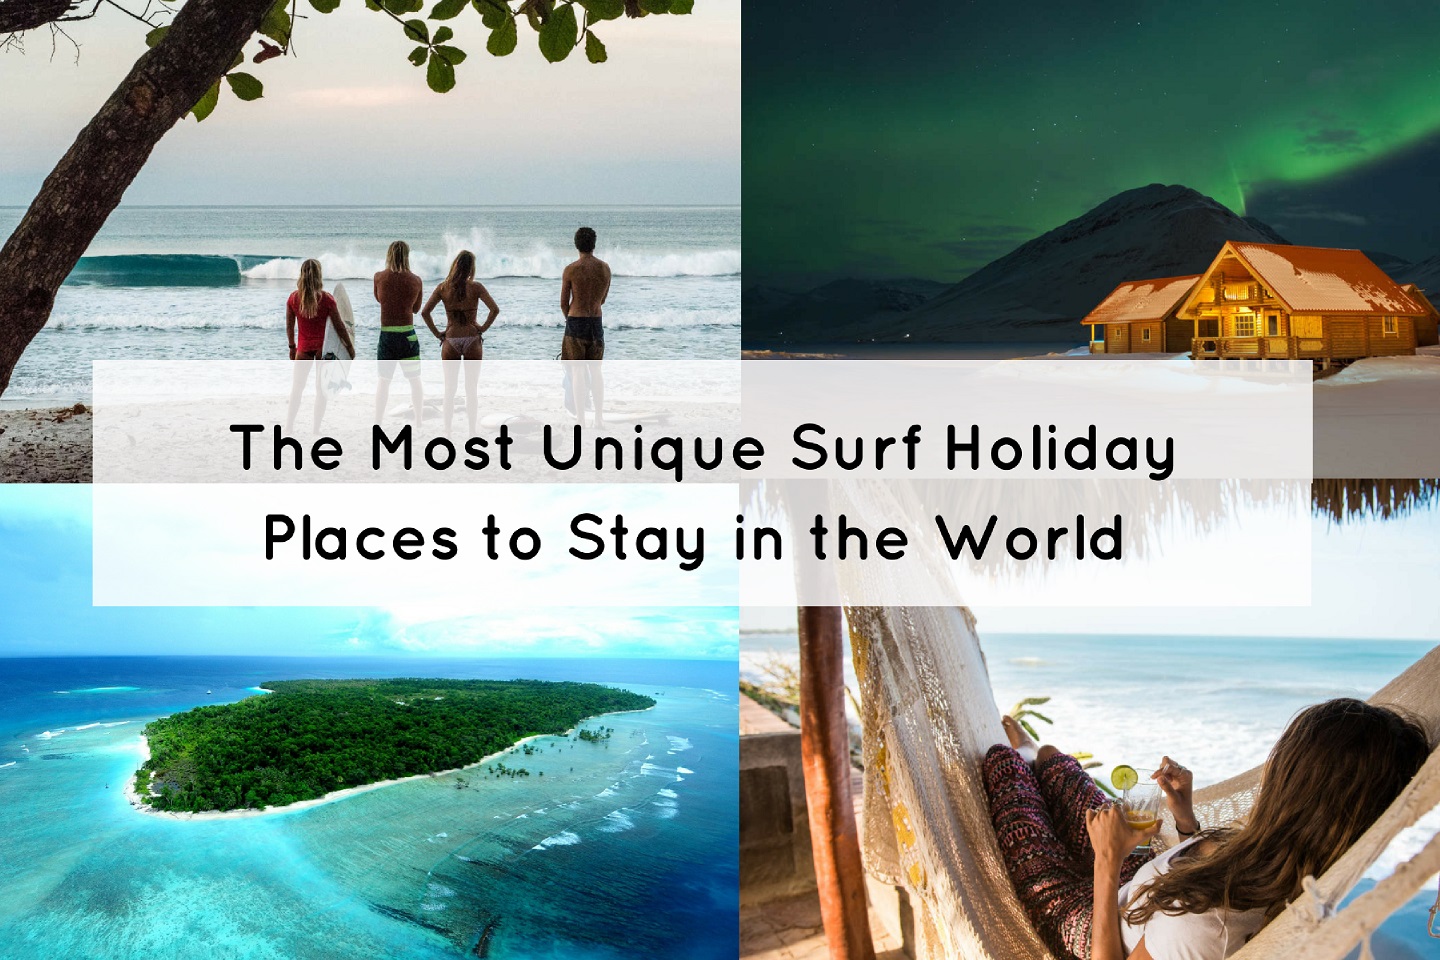 10 Of The Most Unique Surf Holiday Places to Stay In The World